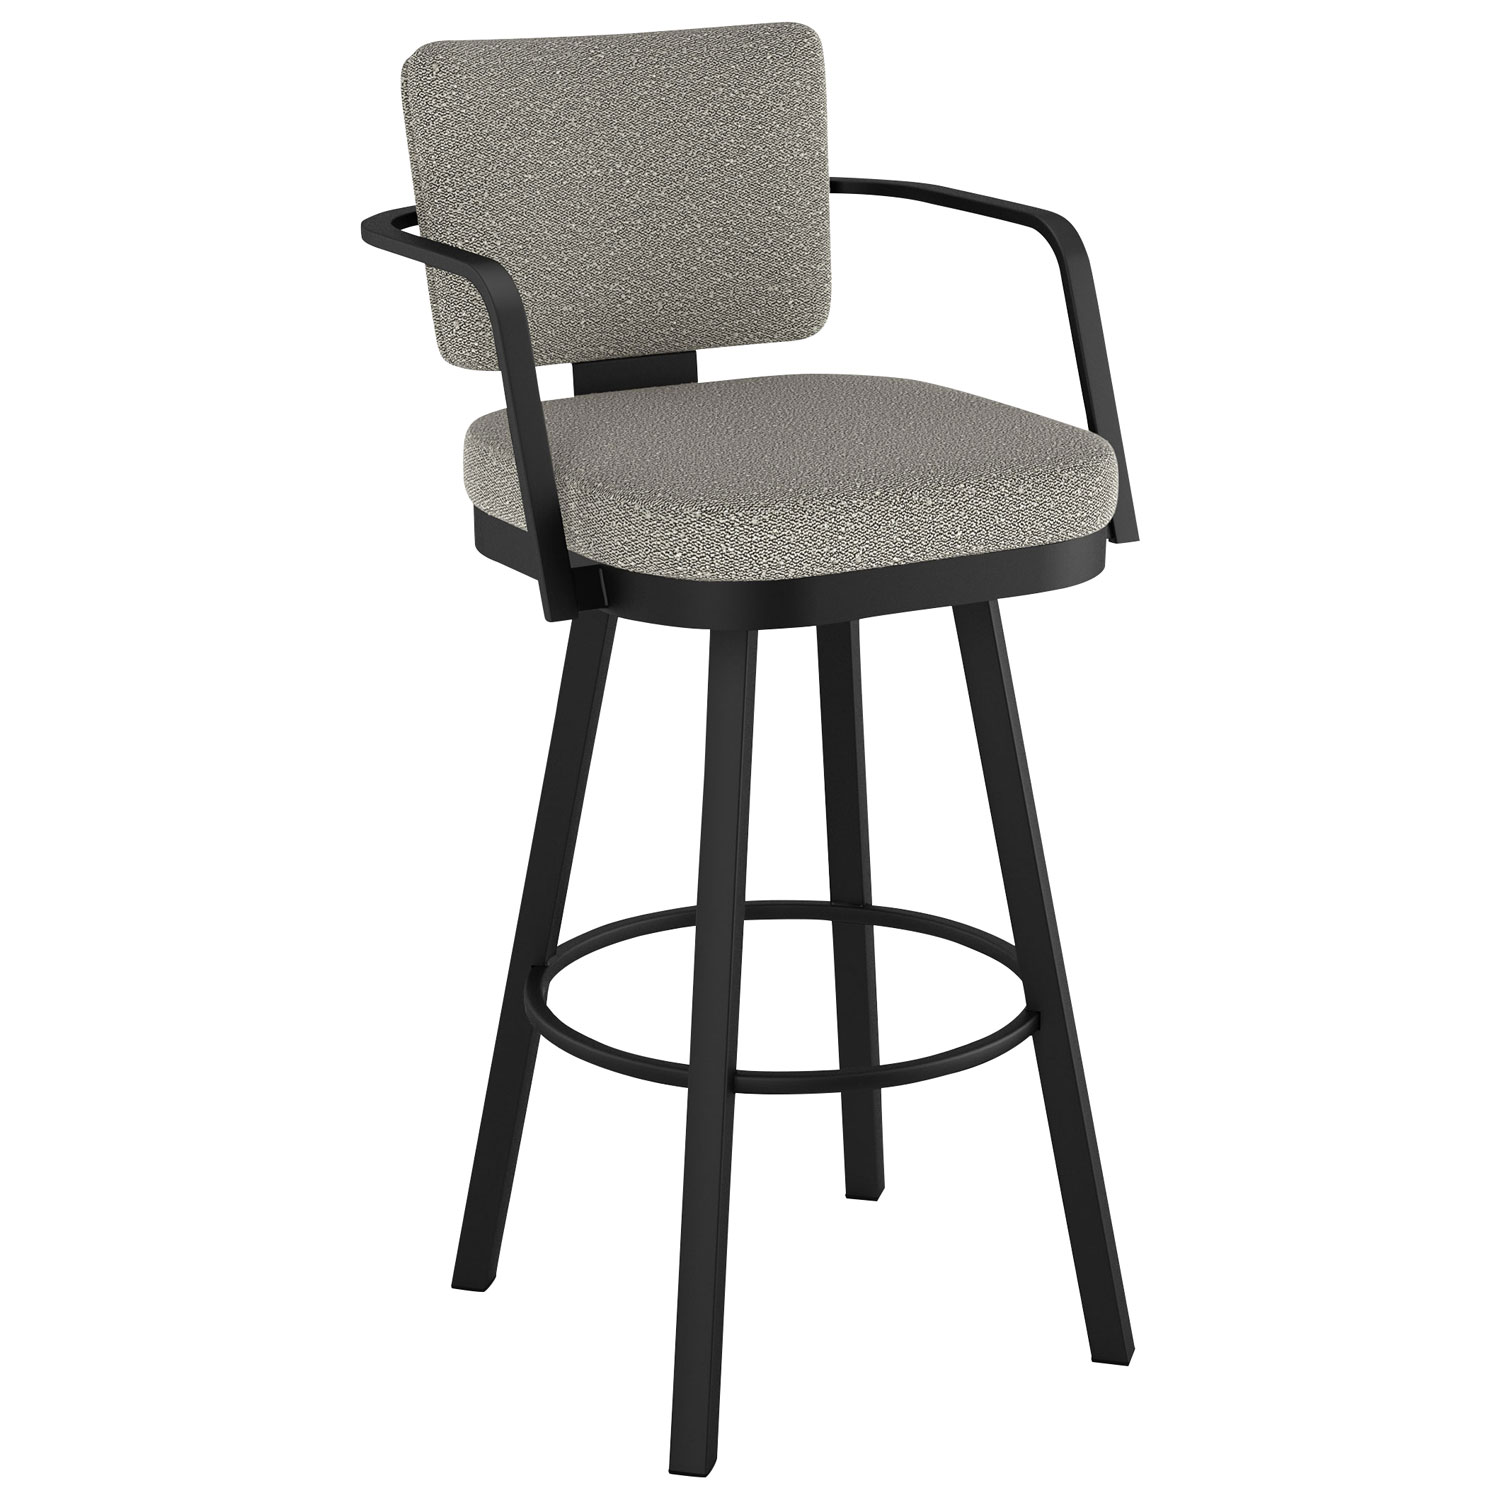 Thea Rustic Country Counter Height Barstool - Beige Grey Boucle/Black